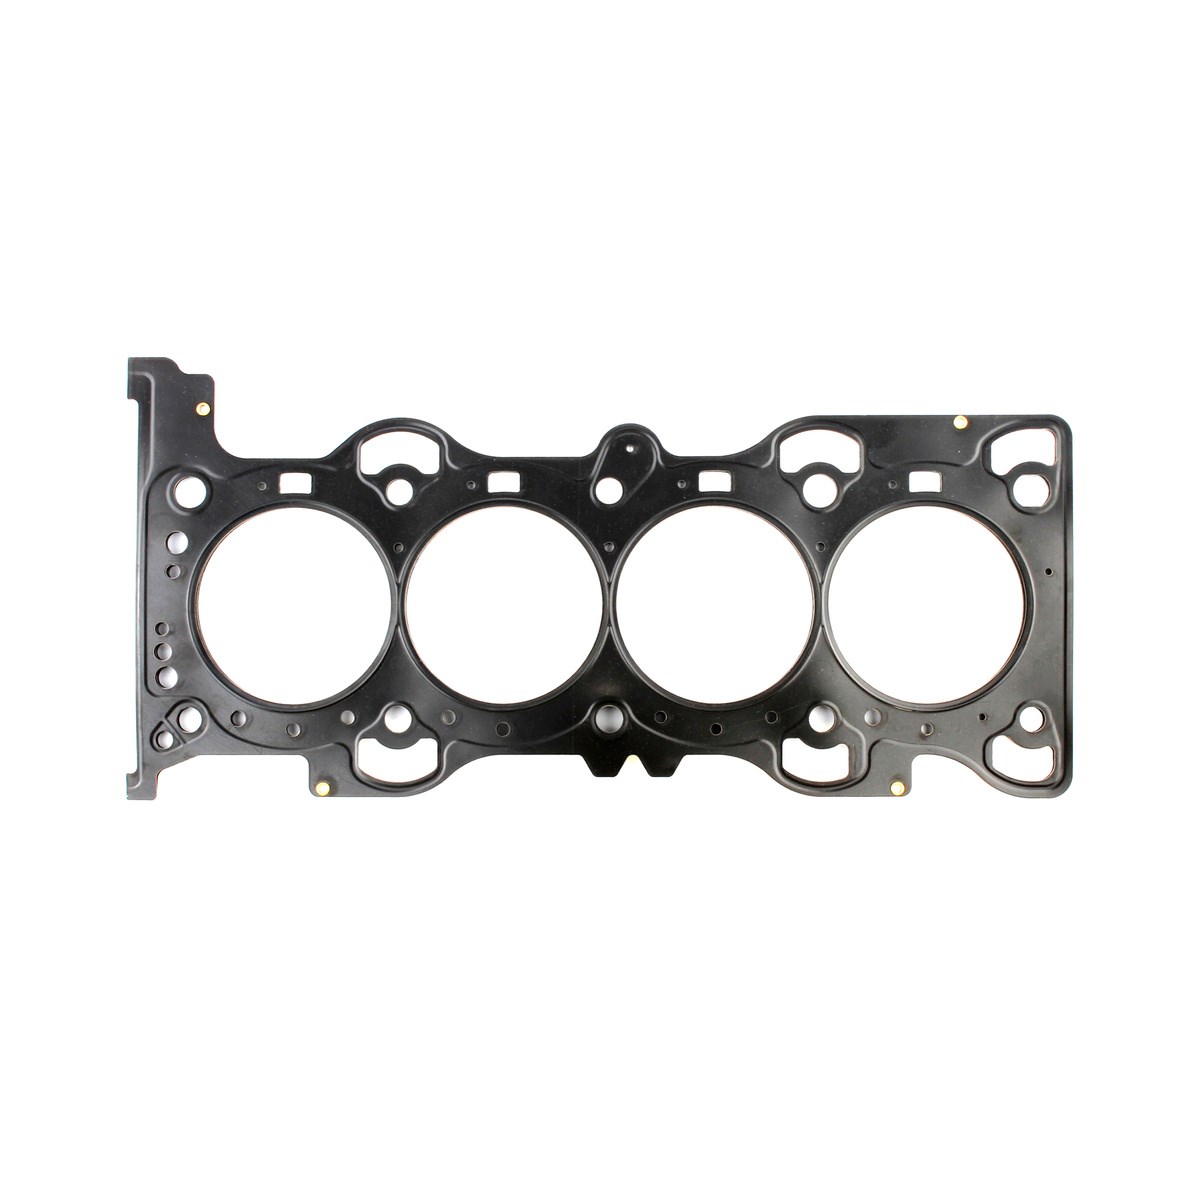 Cylinder Head Gasket Ford 2012-2015 2.0L EcoBoost .066" MLS , 89mm Bore Cometic C15317-066